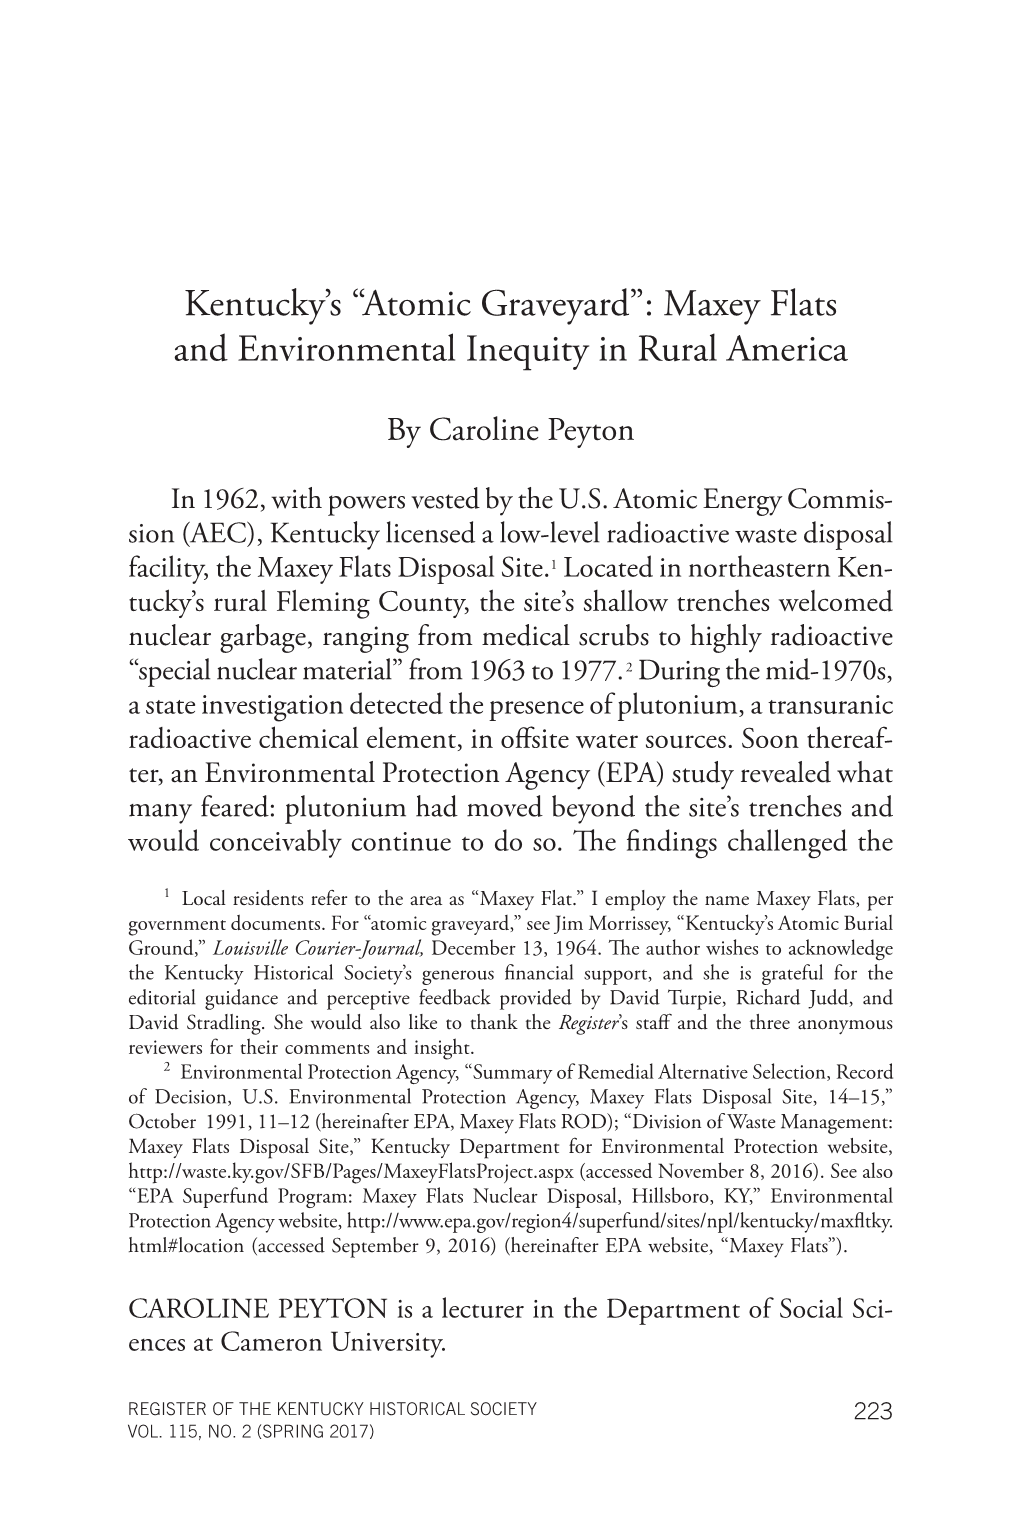 Kentucky's “Atomic Graveyard”: Maxey Flats and Environmental Inequity In